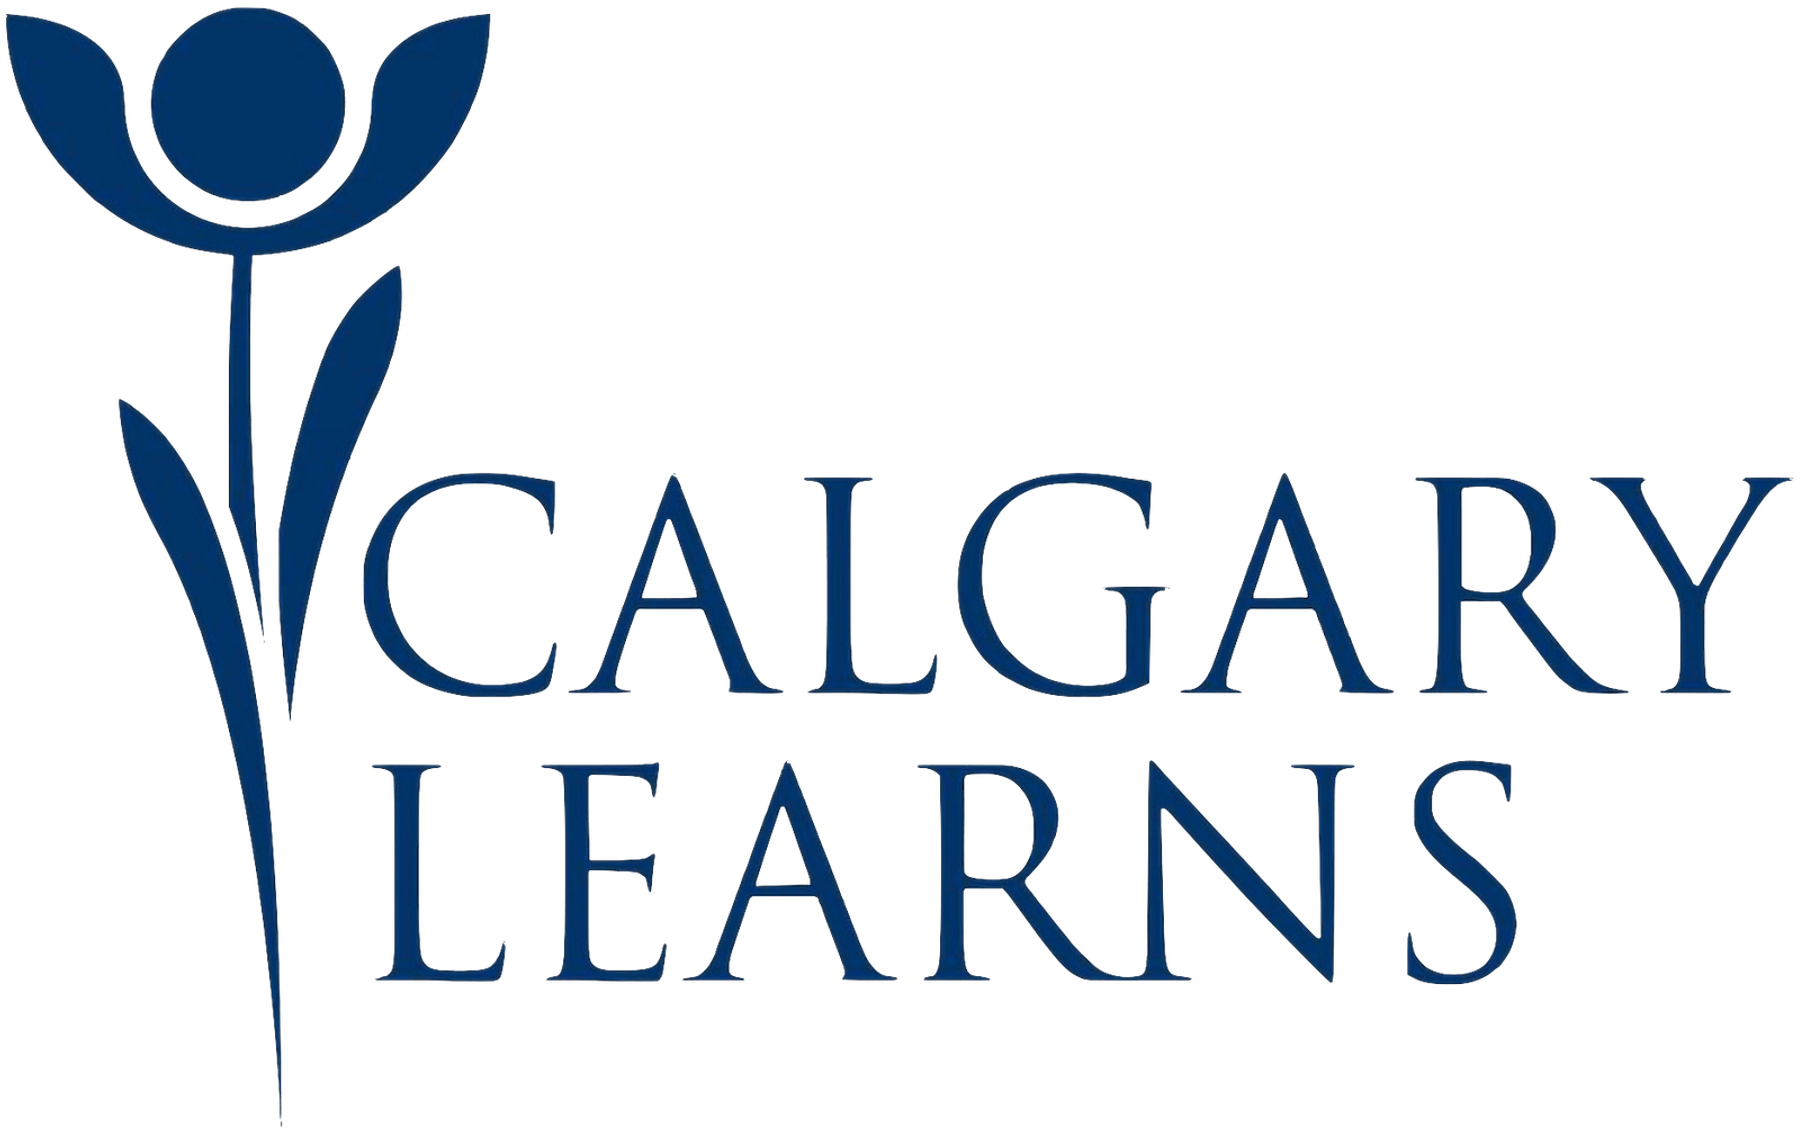 Calgary Learns logo on a transparent background